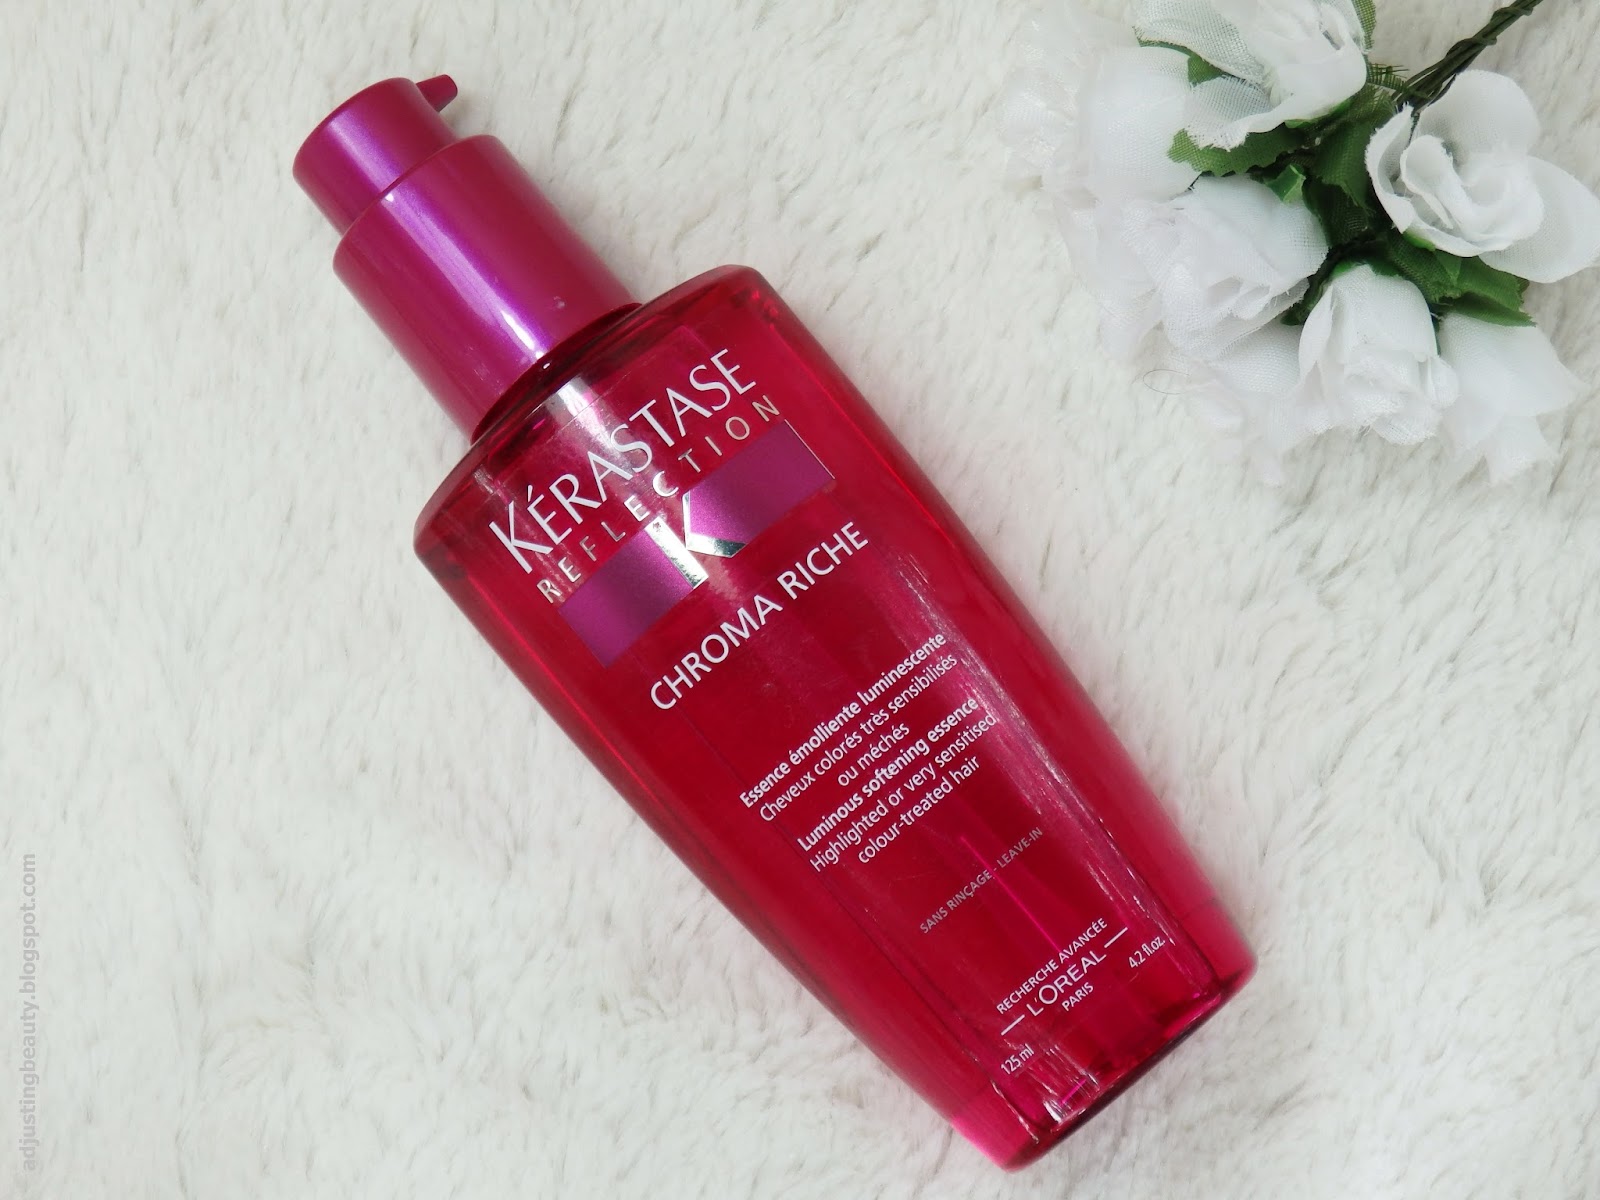 Review: Reflection Chroma Riche - Adjusting Beauty